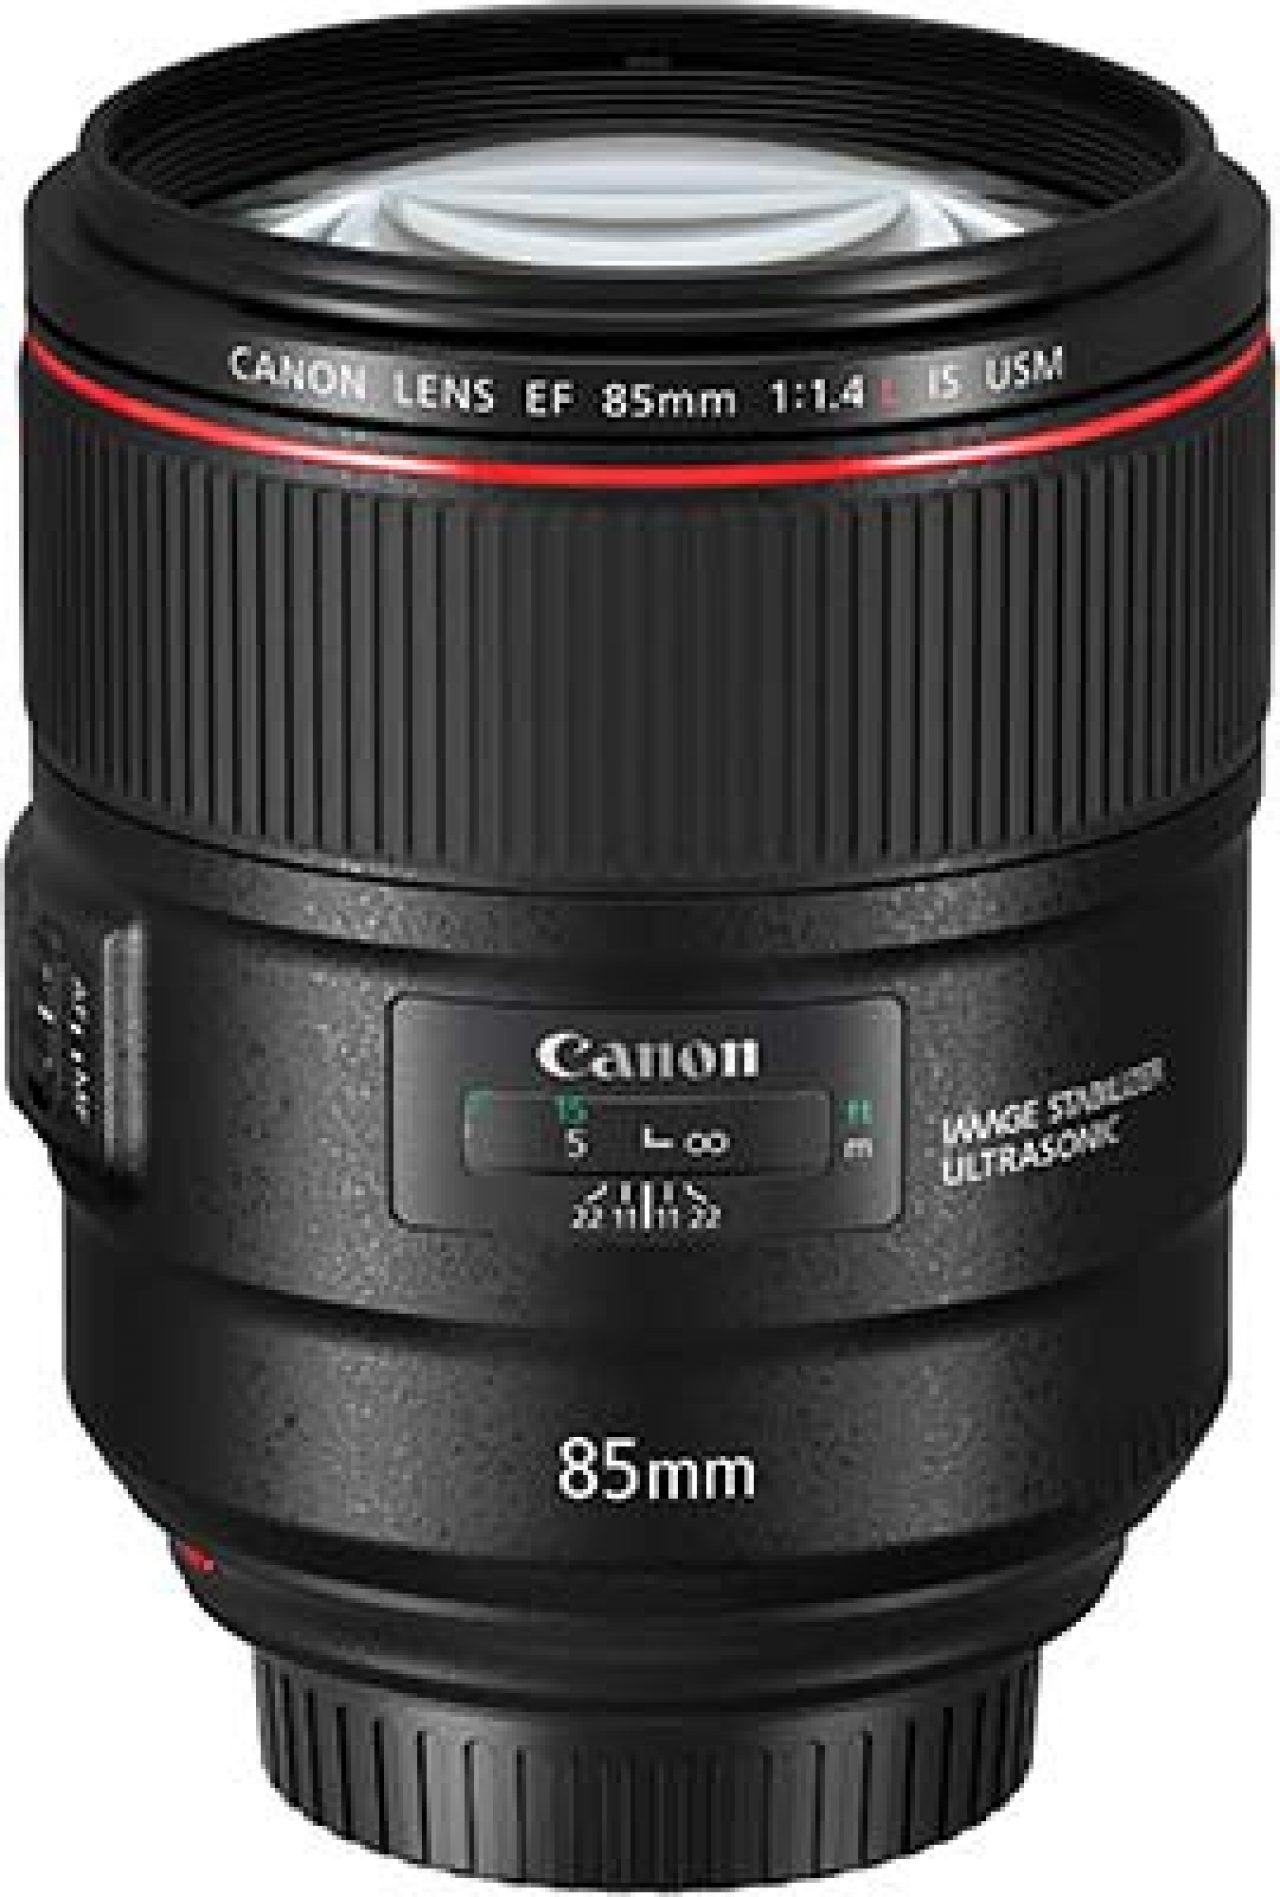 Canon EF 85mm f/1.4L IS USM Review | Photography Blog